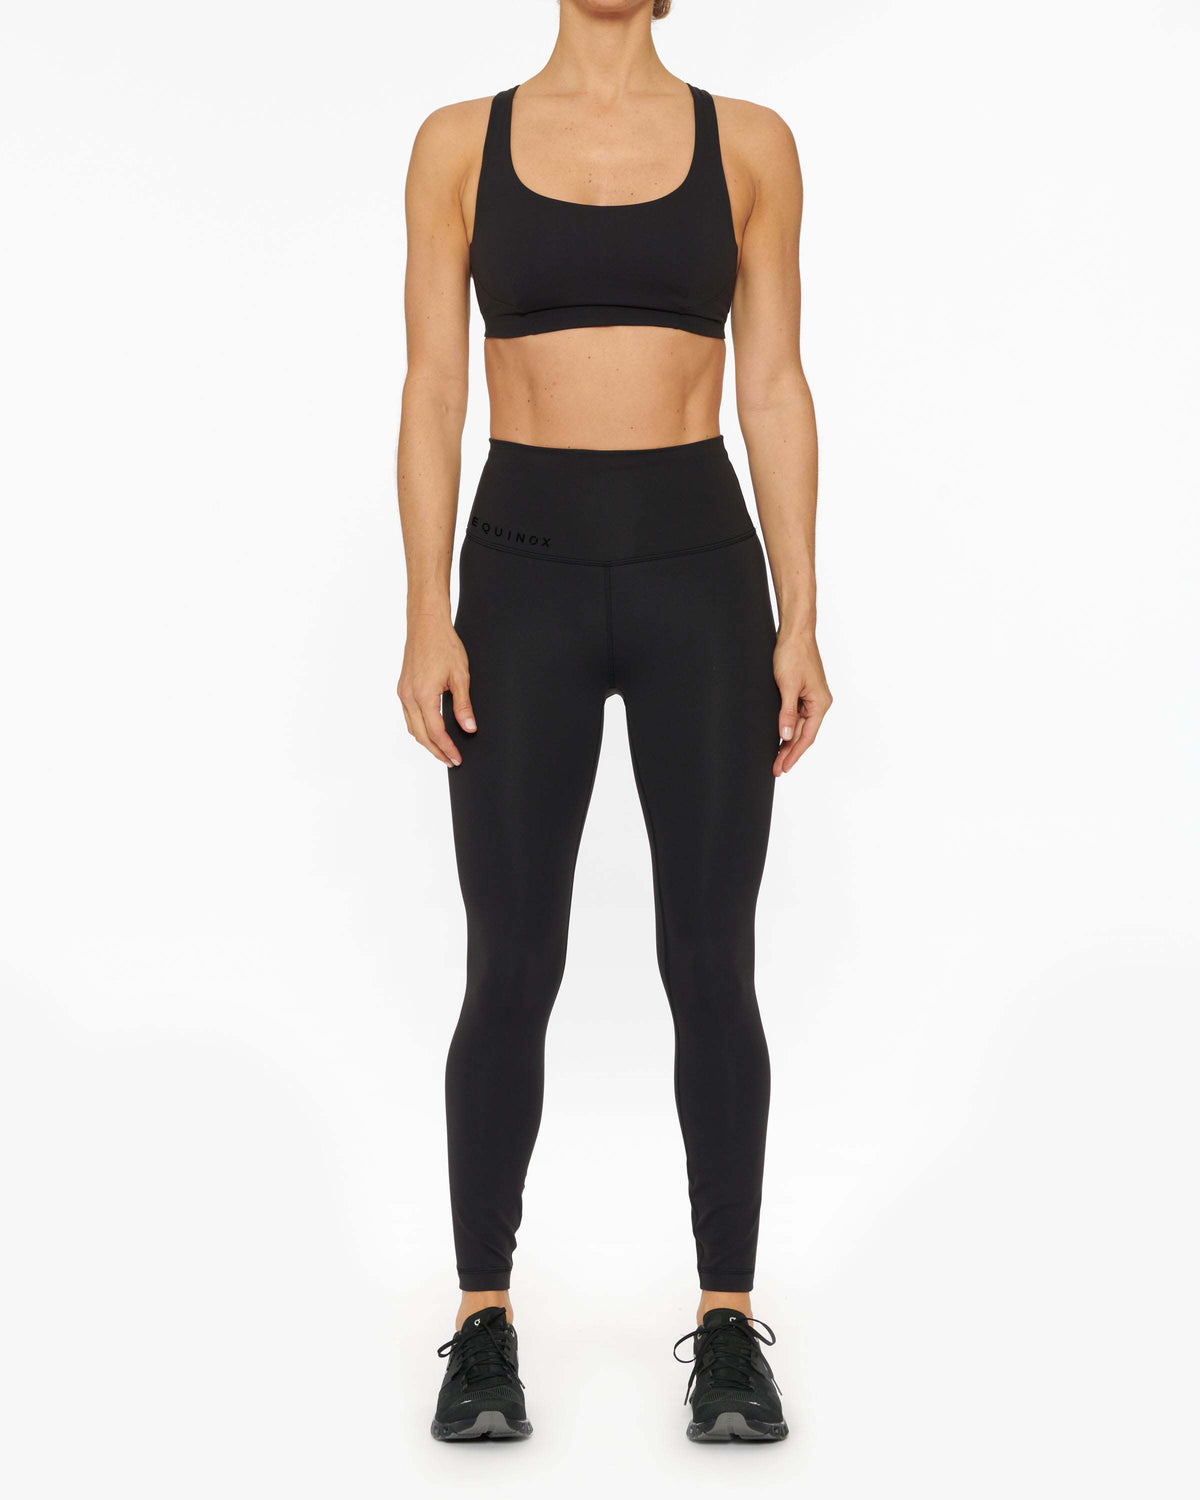 Wunder trains 25” date brown size 8 and white sports bra all in motion from  target… Happy shopping everyone !! : r/lululemon